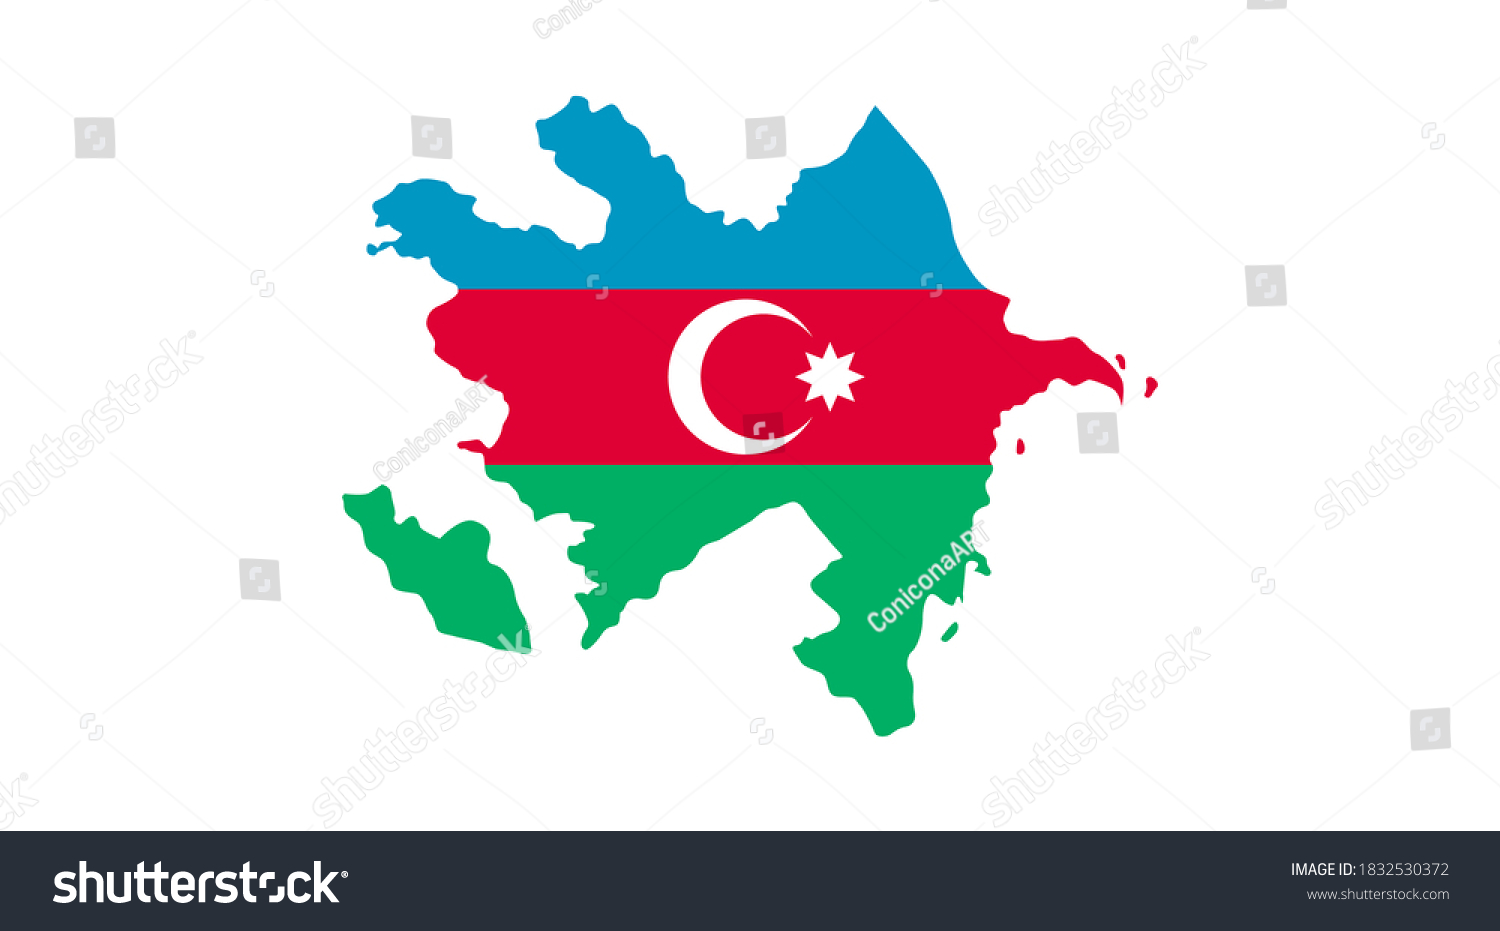 SVG of Map of Azerbaijan - Flag is a fully layered, editable vector map file. svg